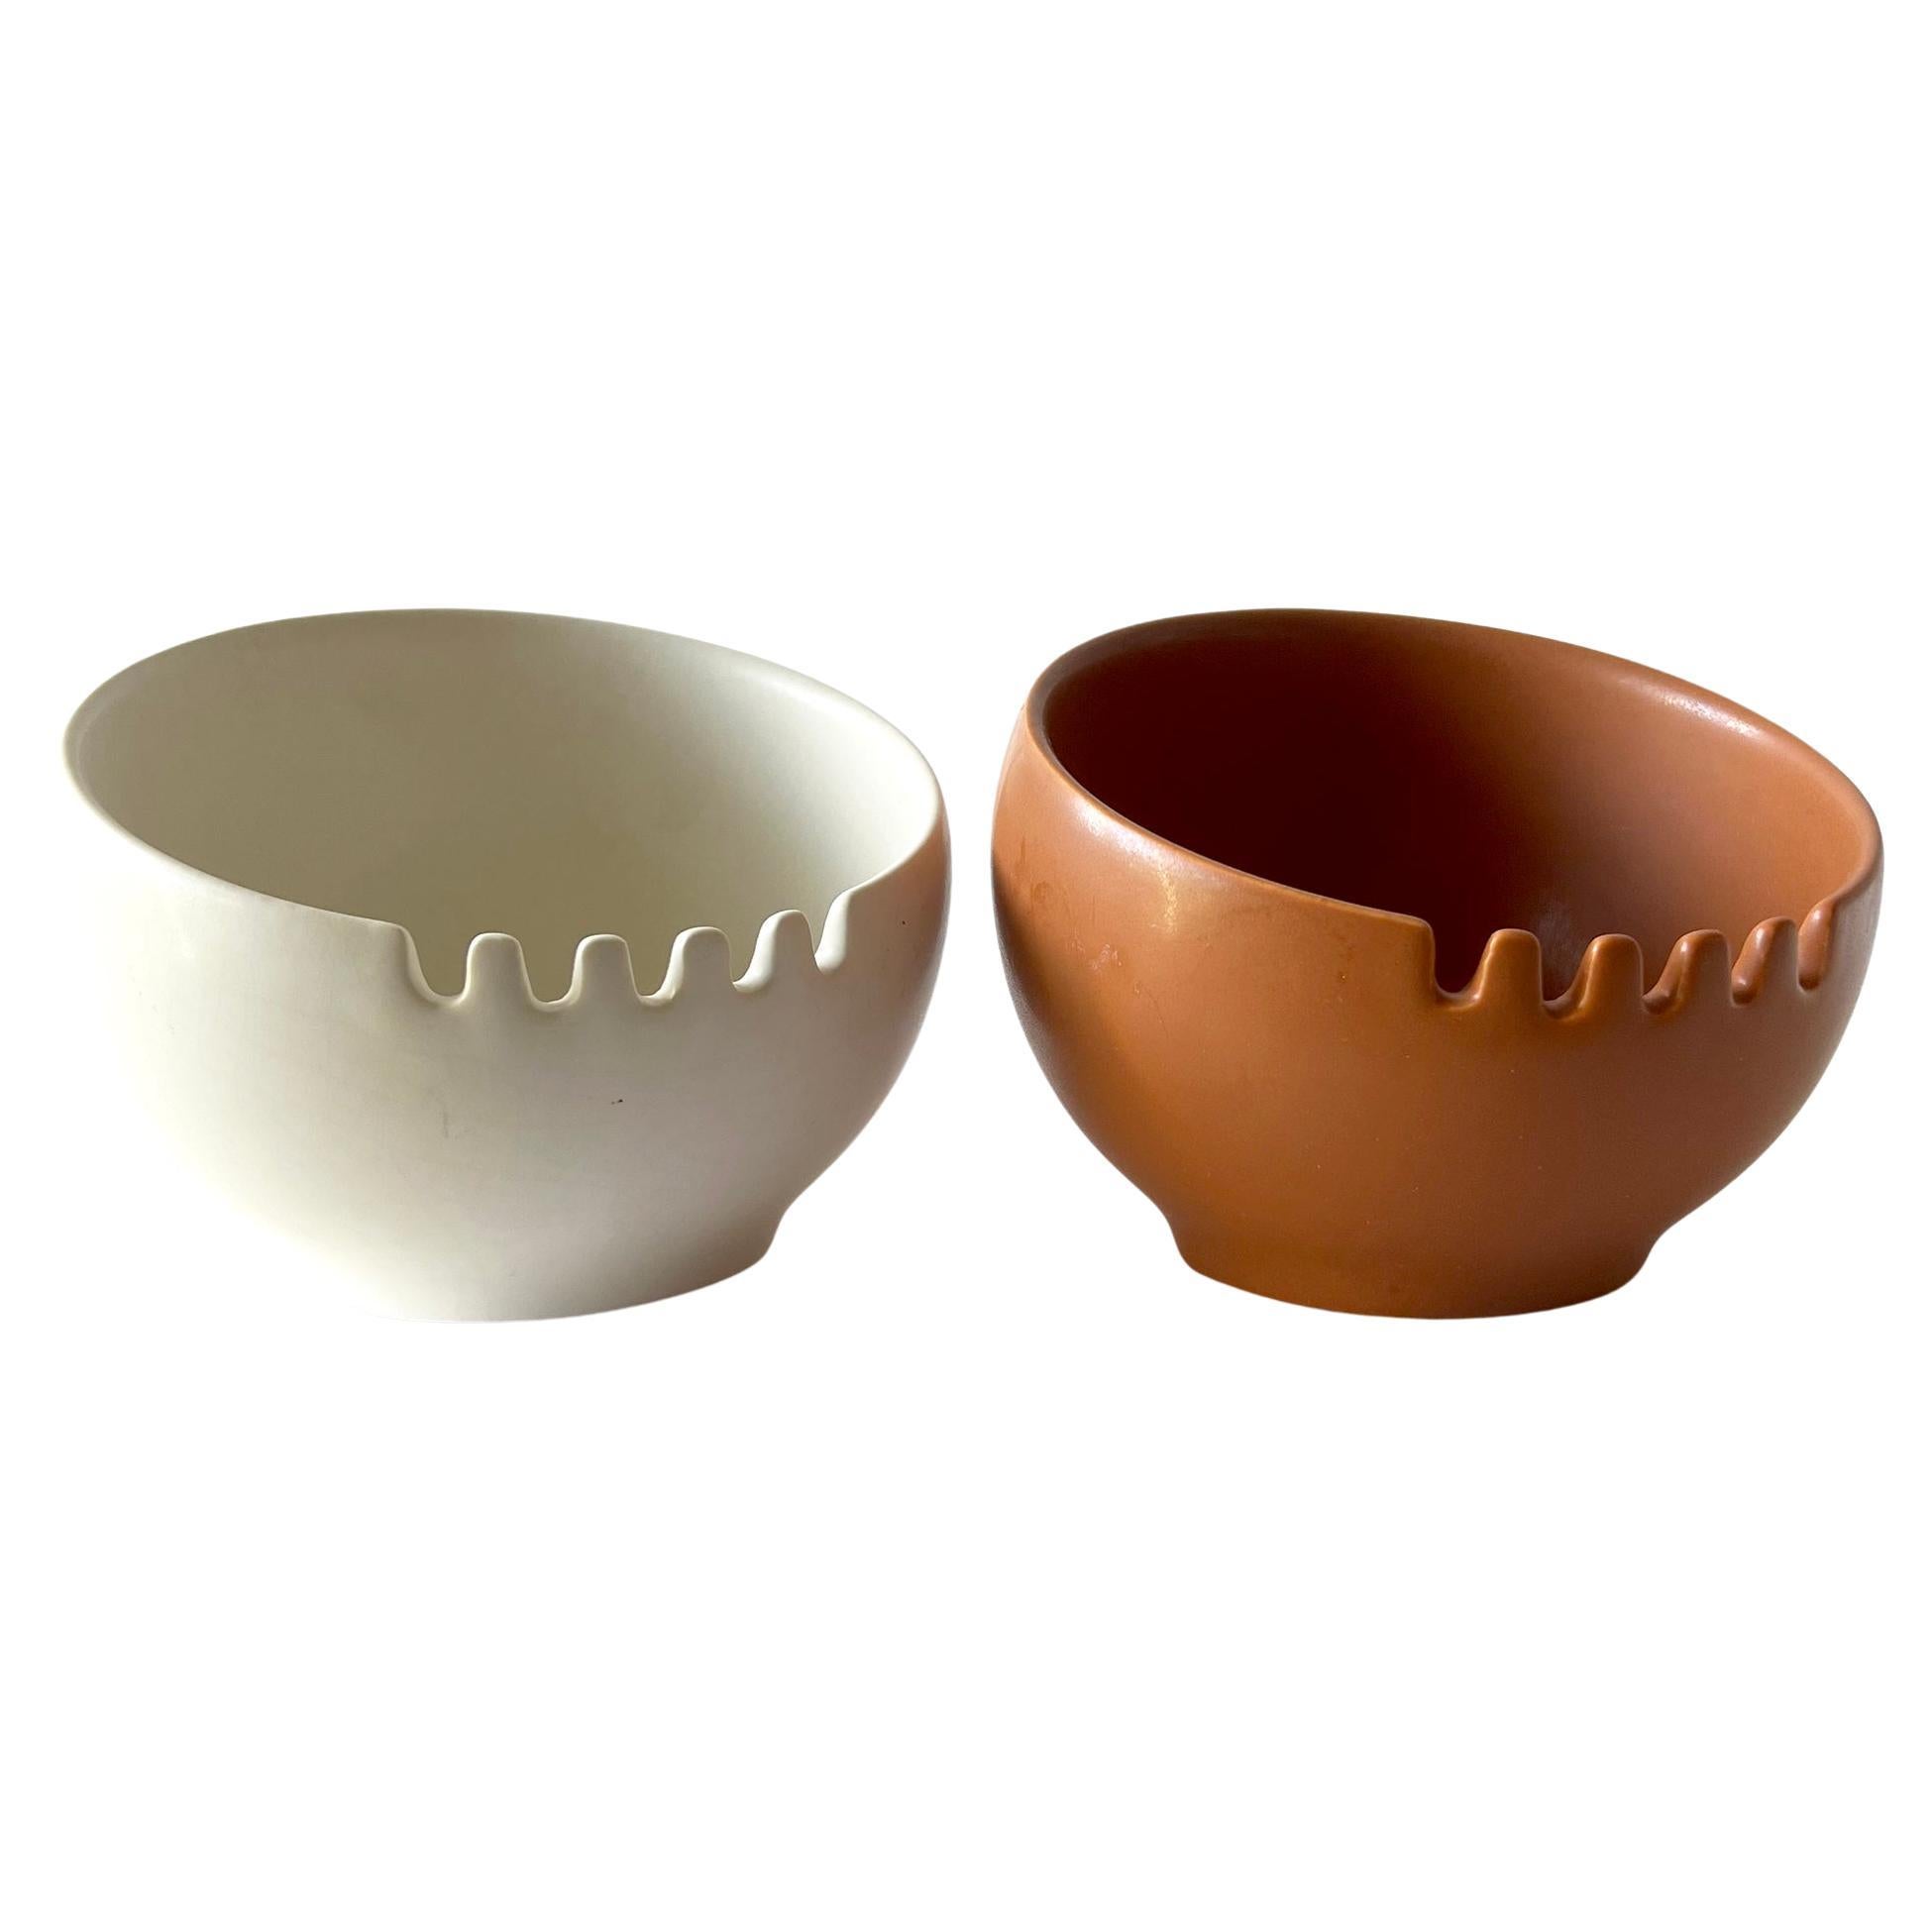 Pair of Hyalyn ceramic ball ashtrays from the late 1960's or early 1970s.  They measure 5.25